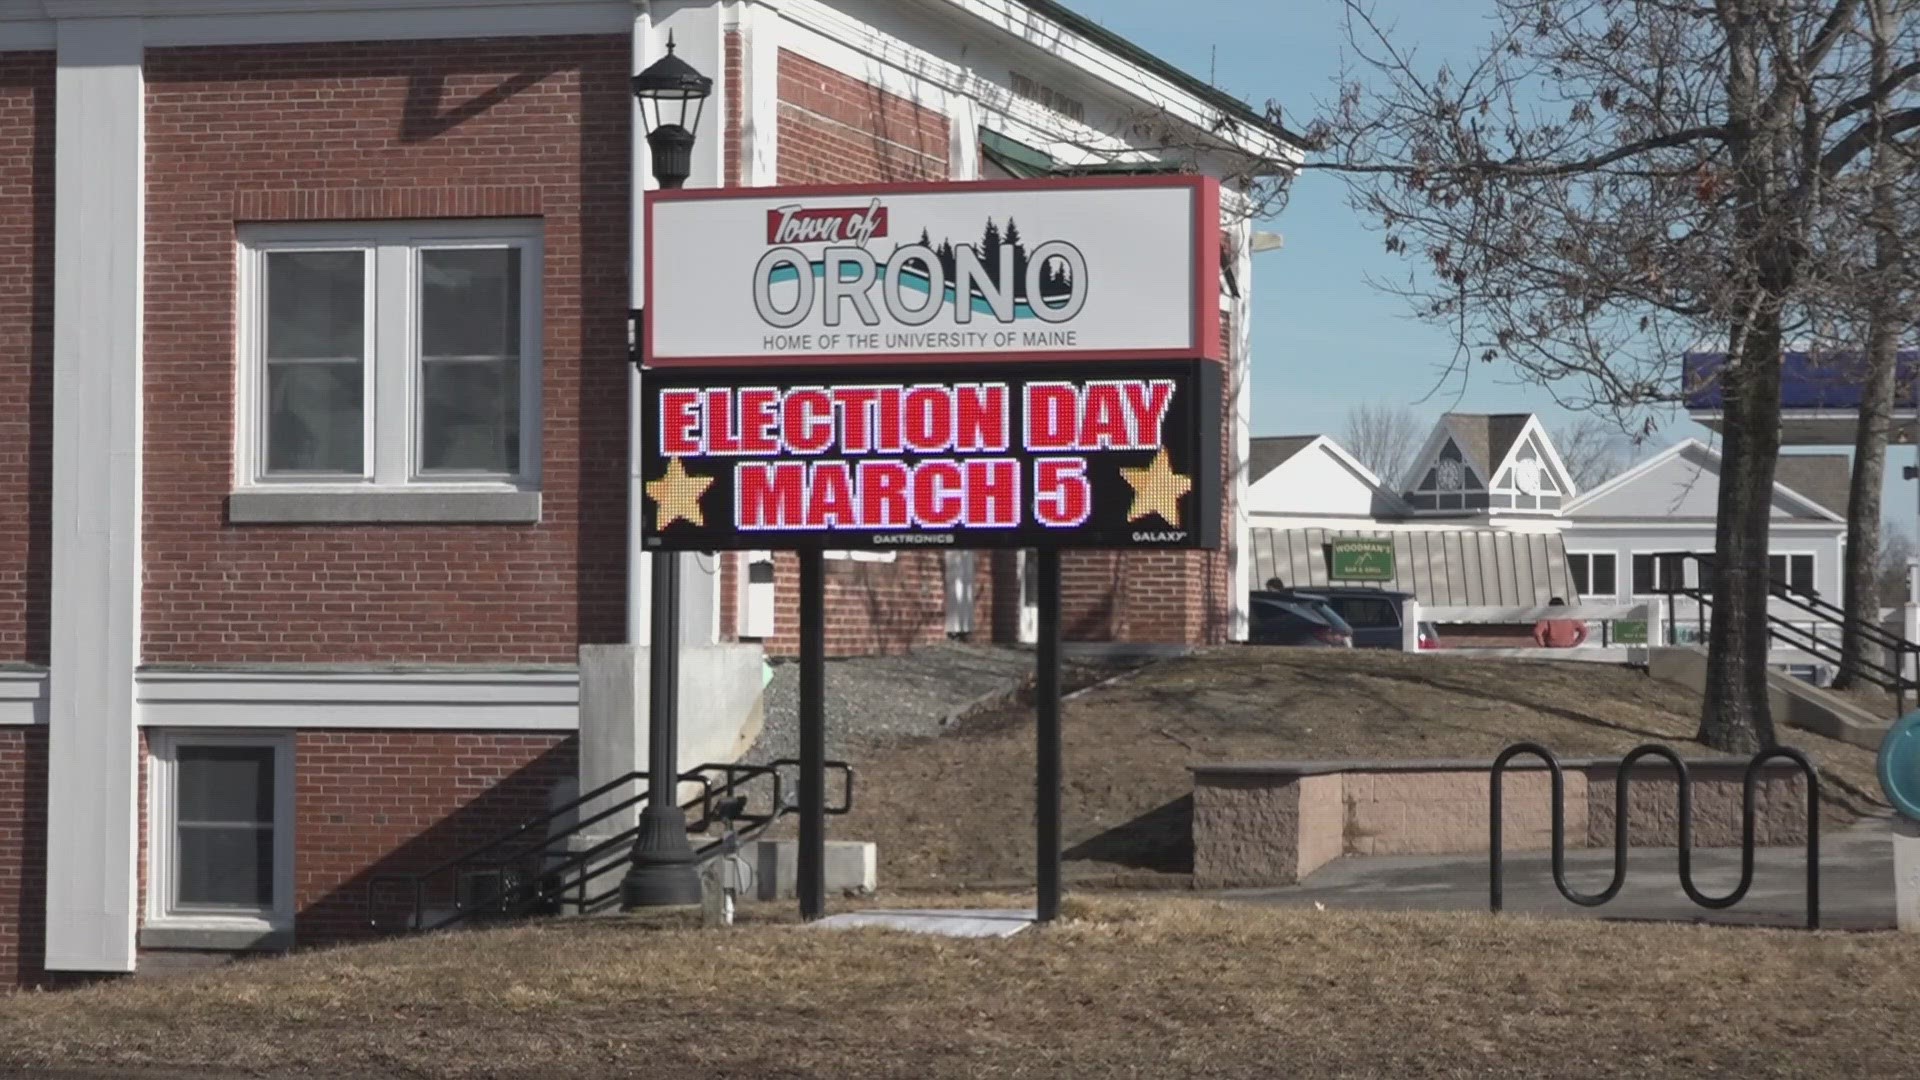 This year's election falls on Super Tuesday, the biggest presidential primary election day.